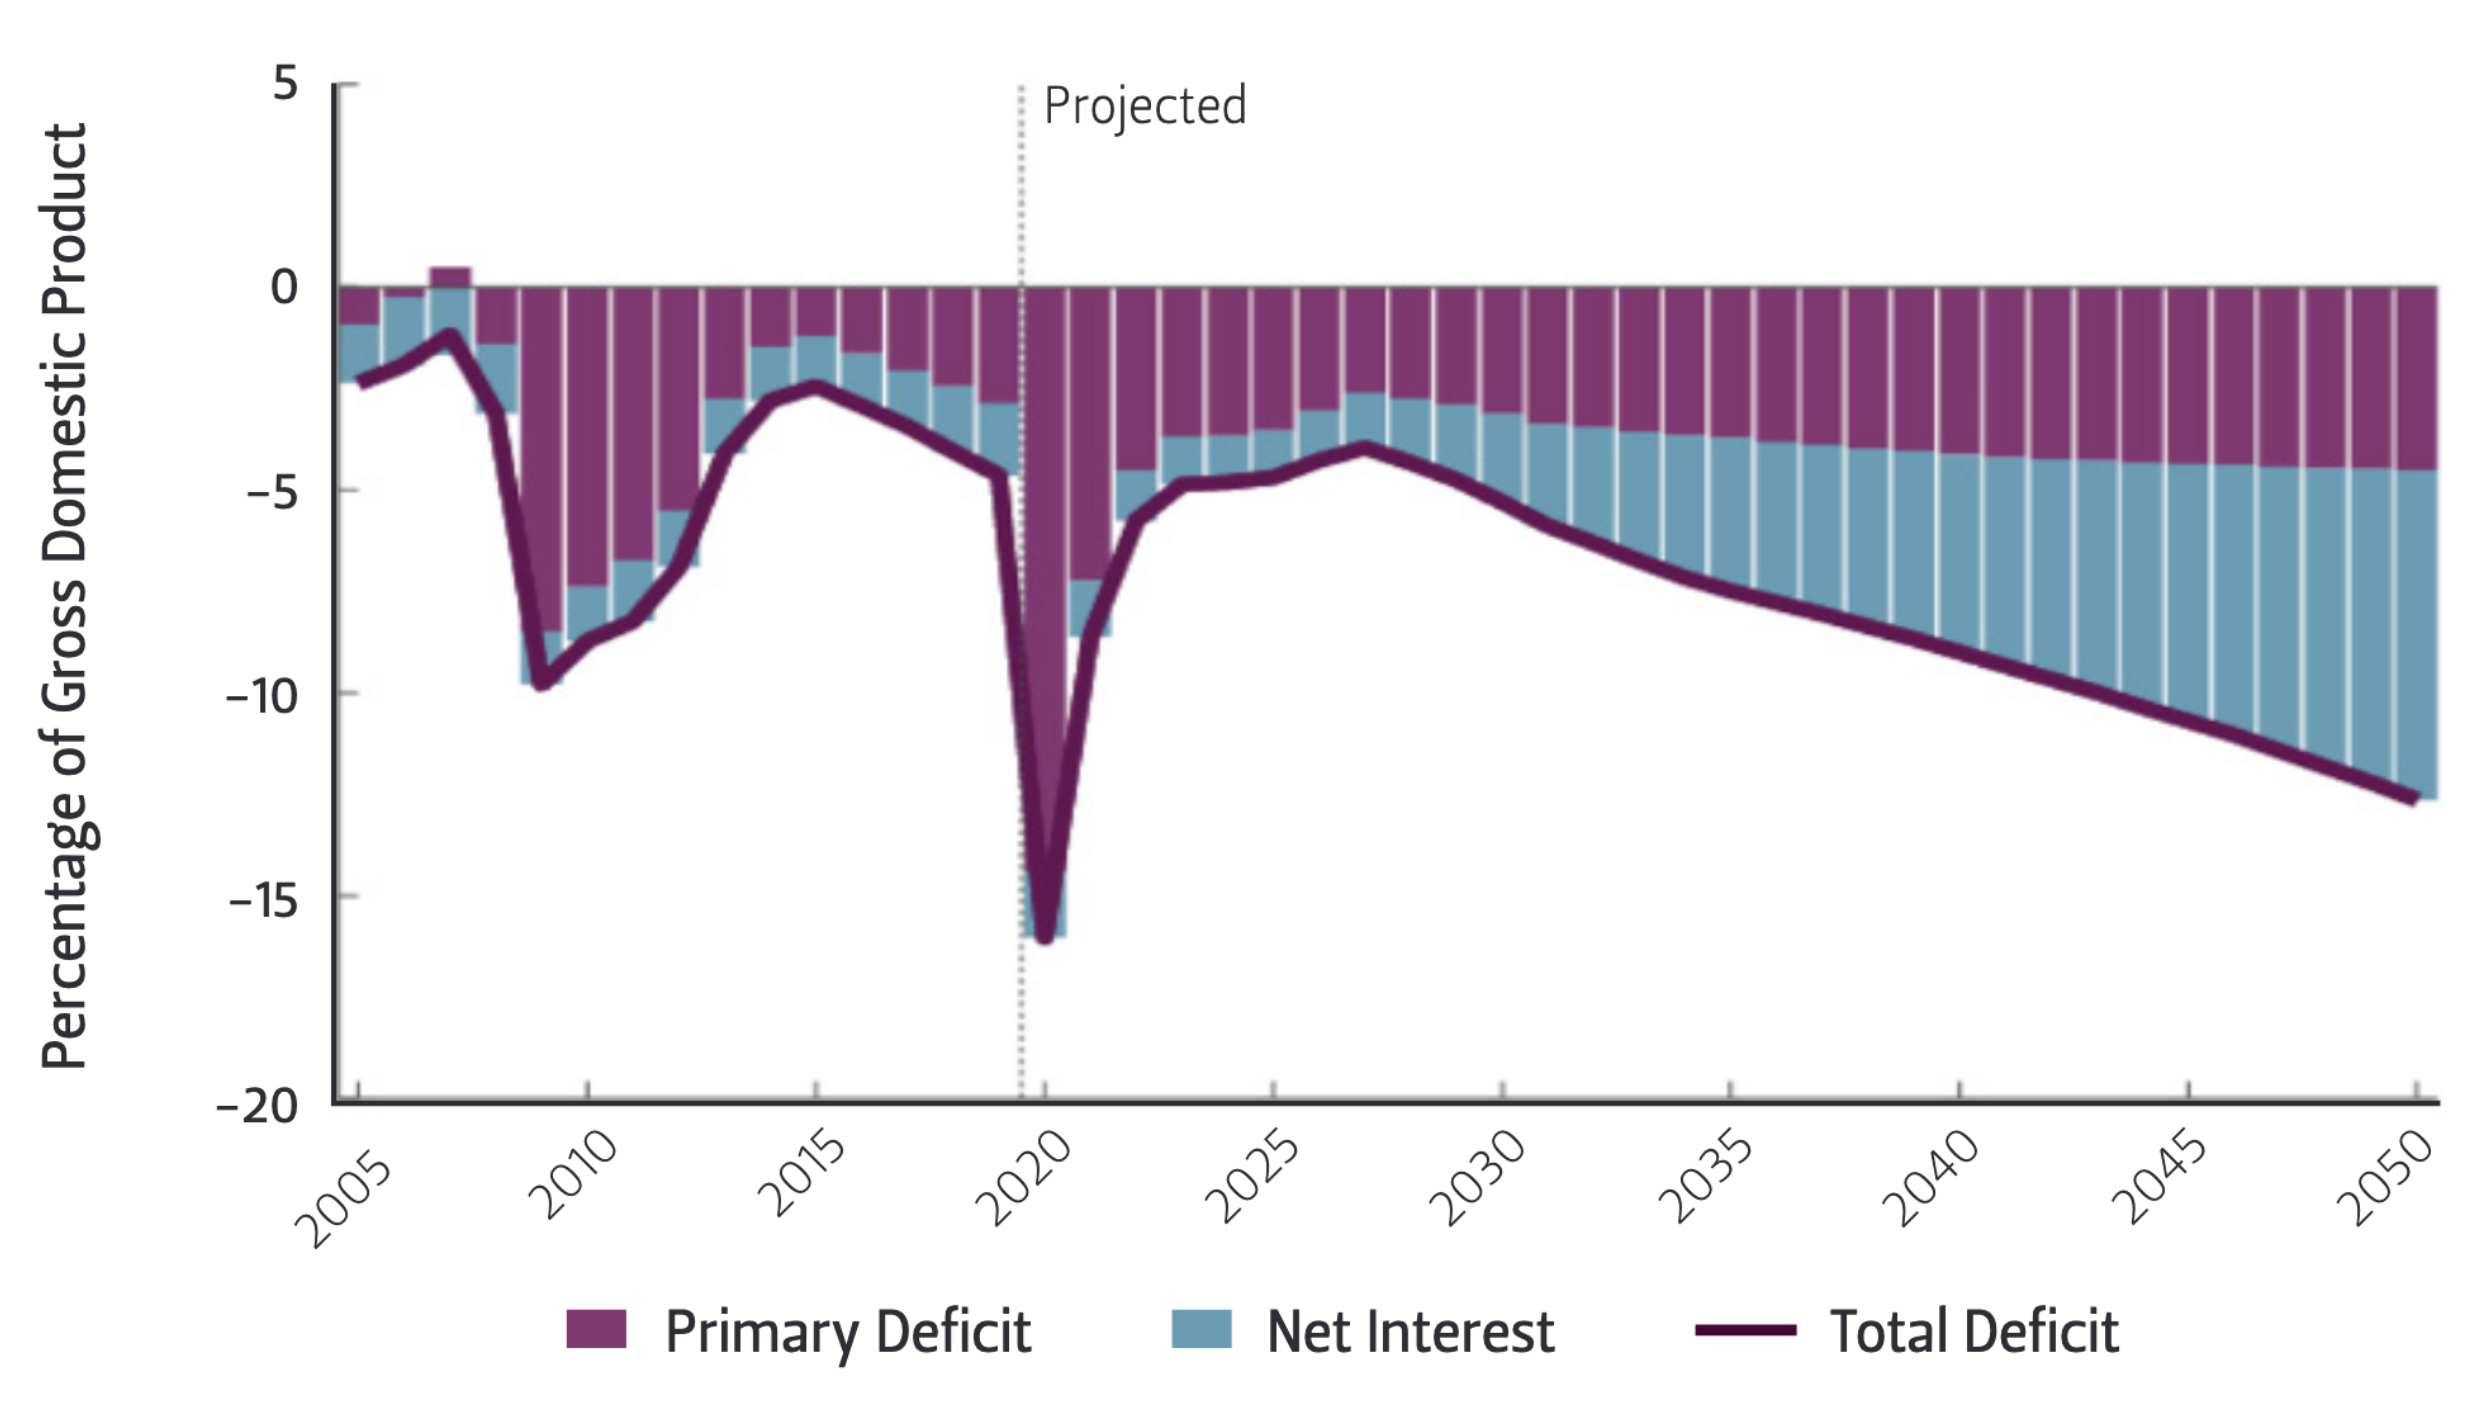 Figure 3 — Total Deficits, Primary Deficits, and Net Interest